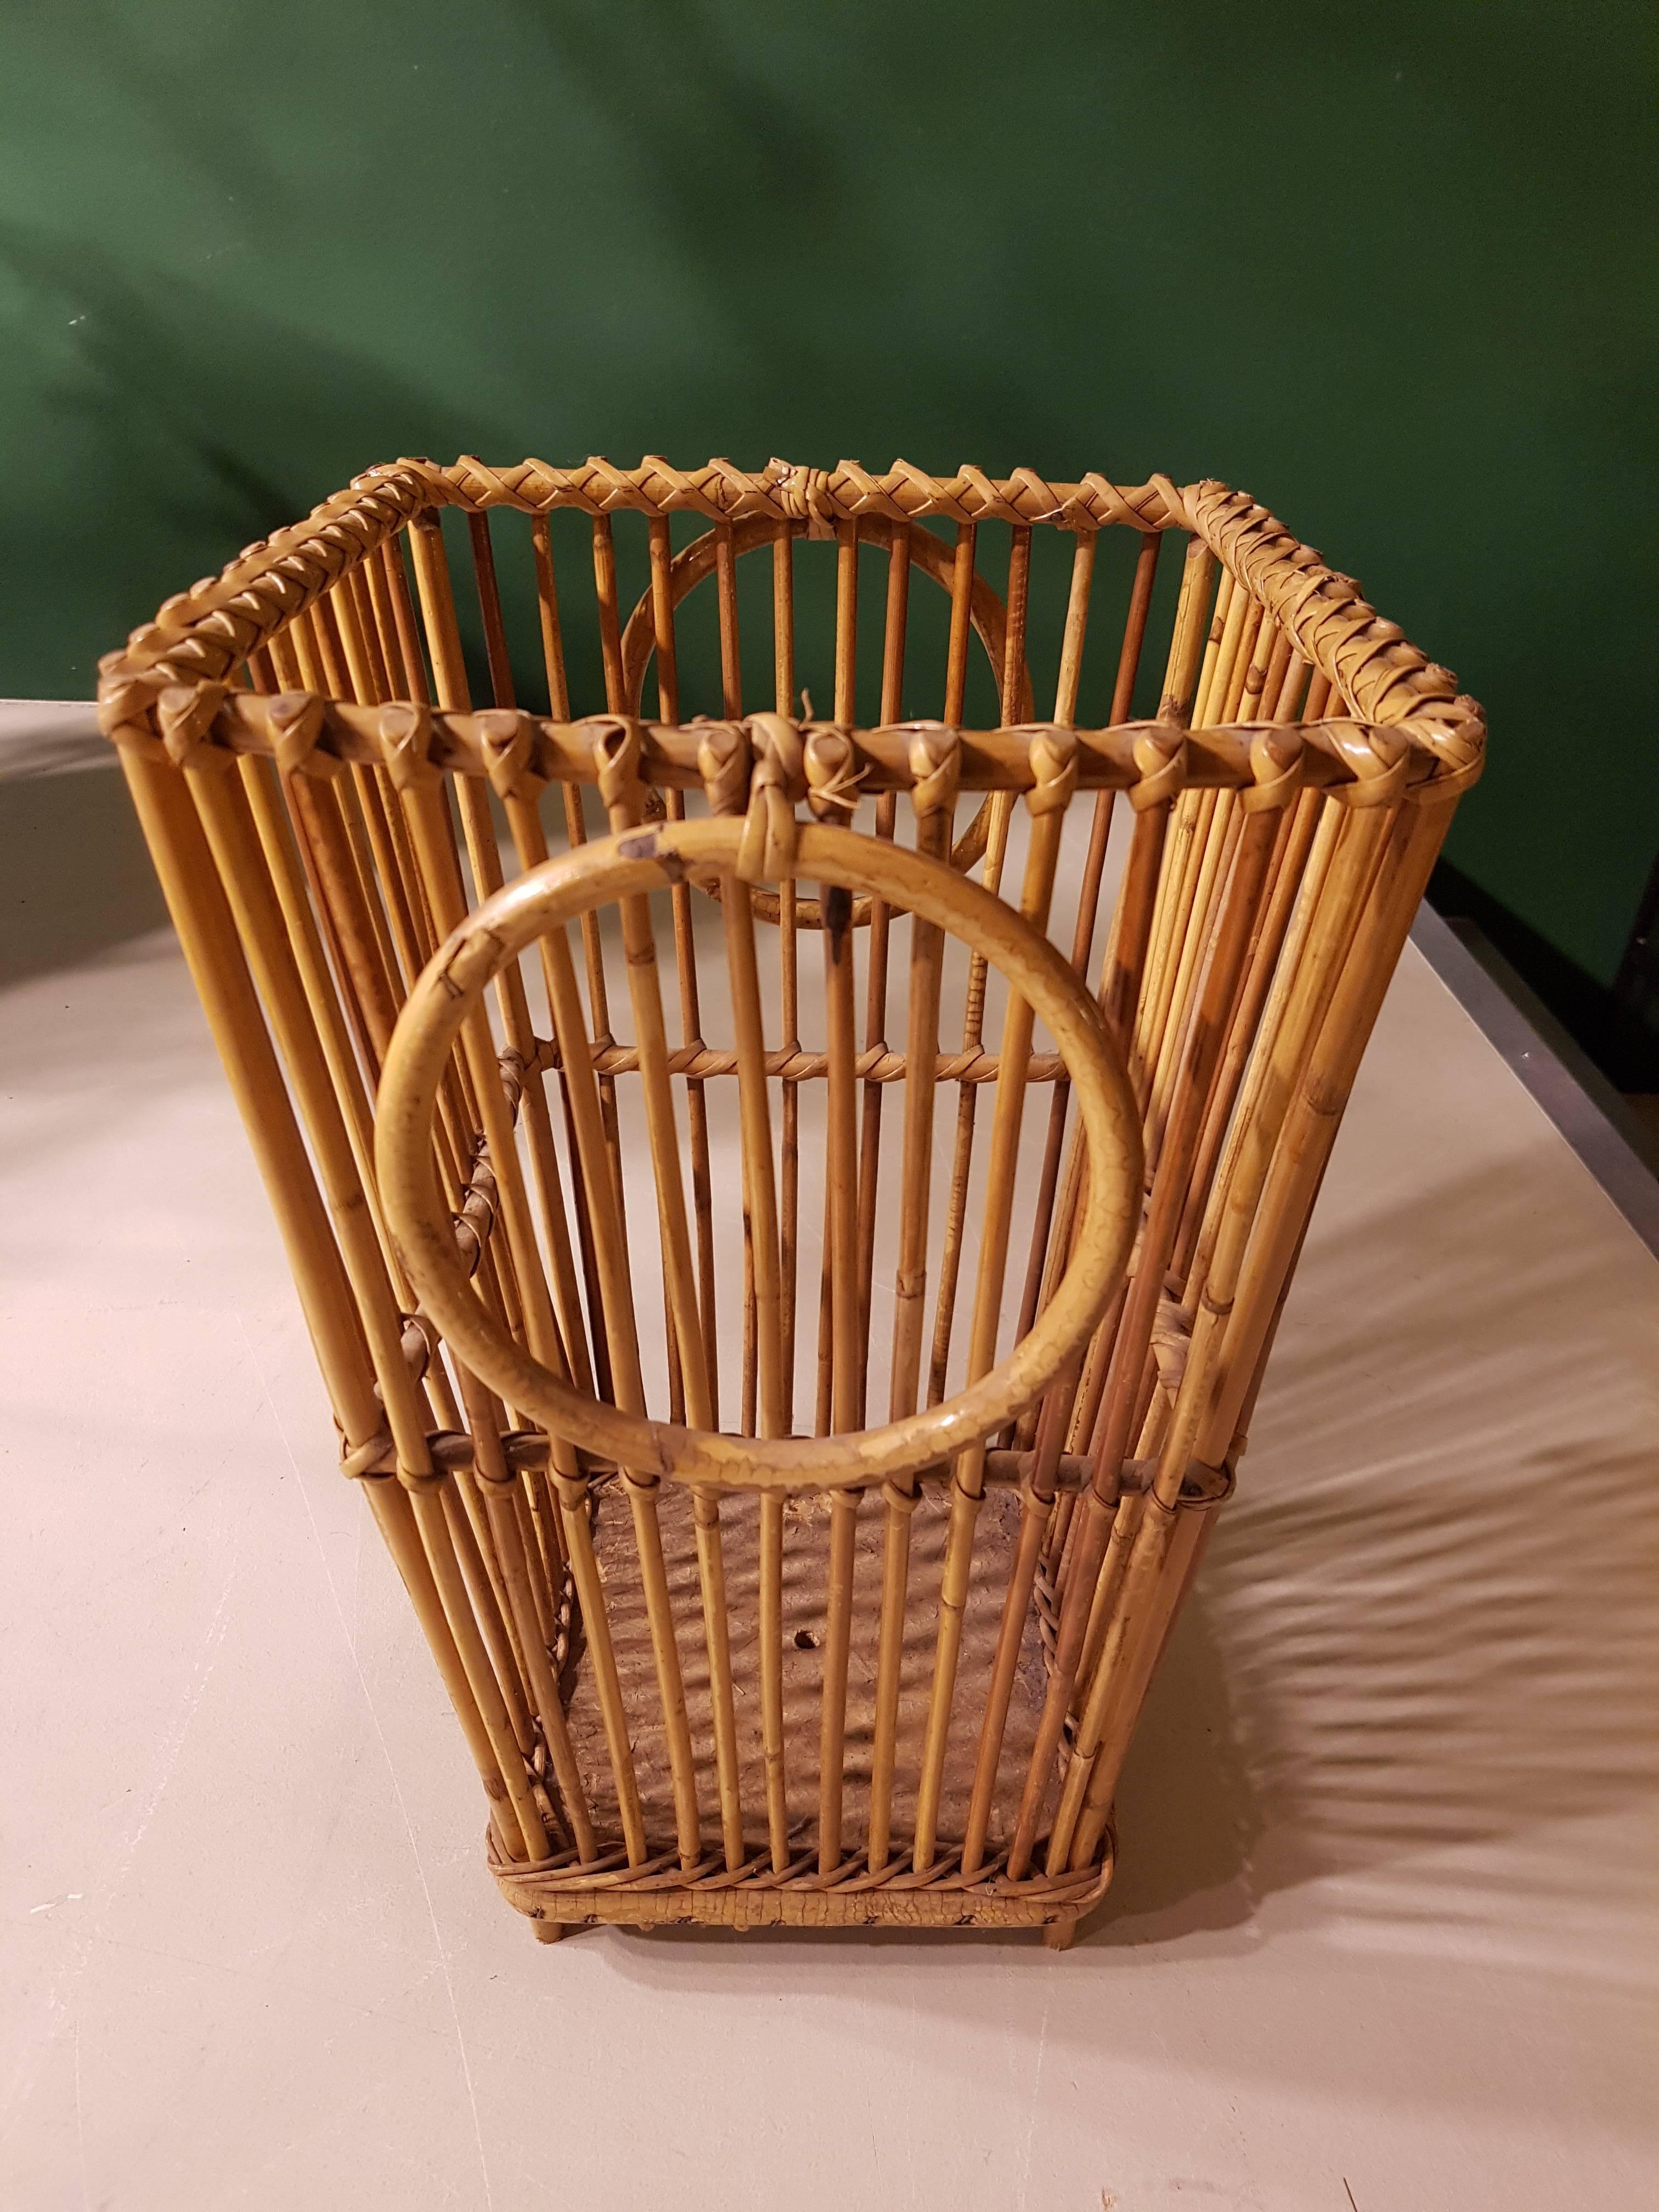 20th century French square basket made of wicker from the 1960s.